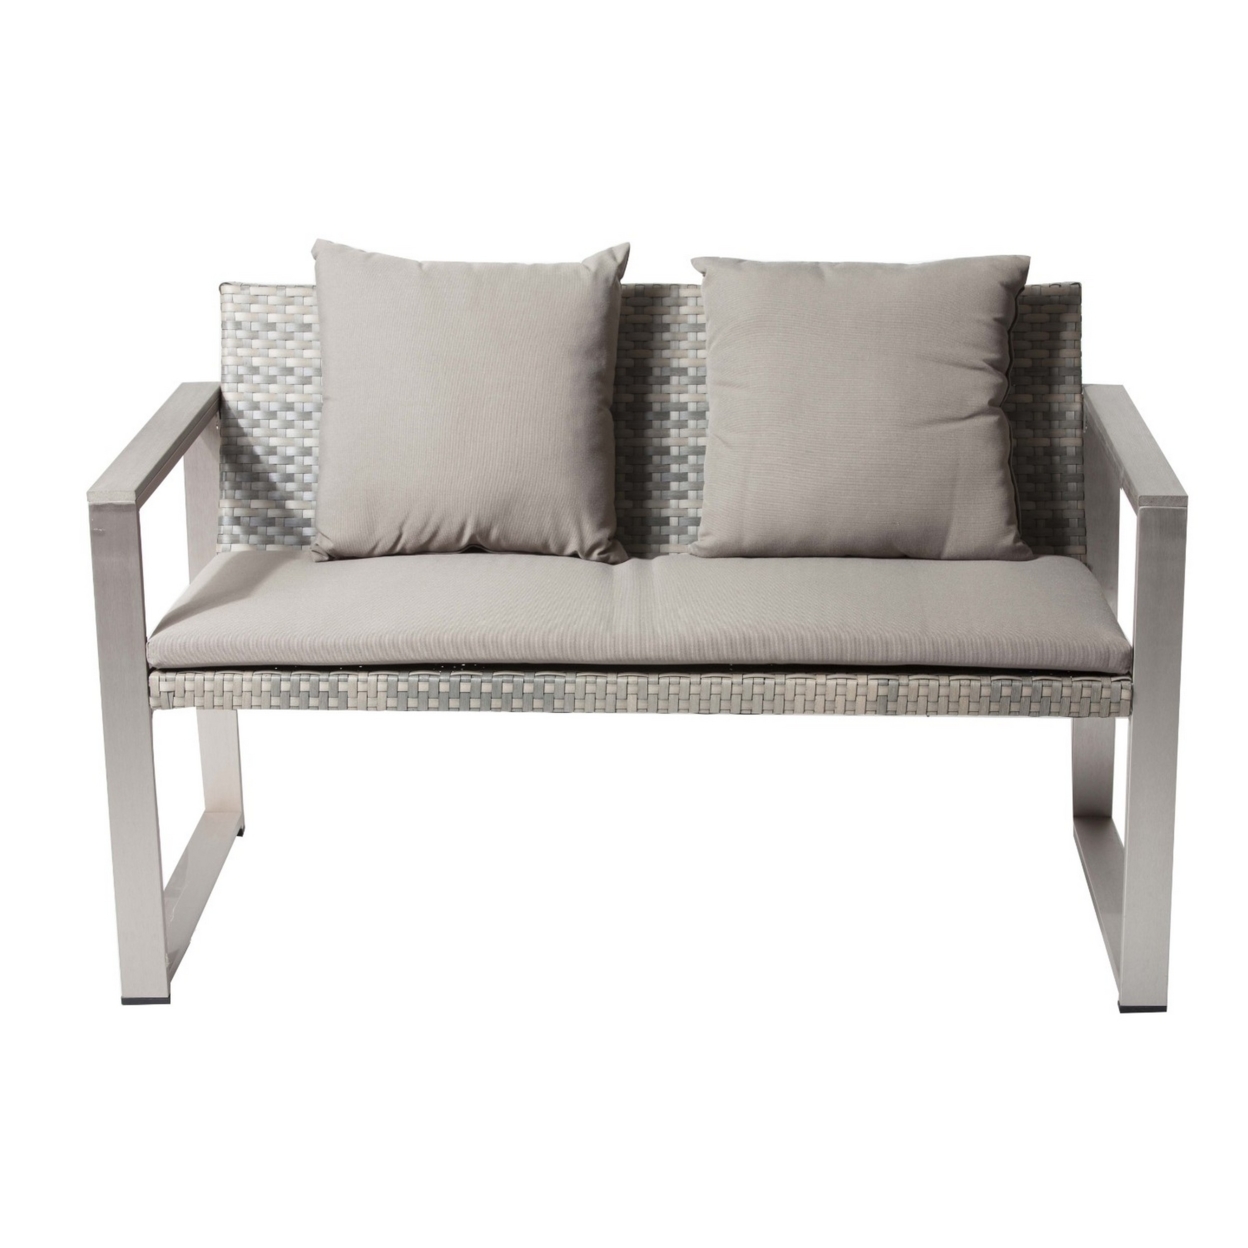 Anodized Aluminum Upholstered Cushioned Sofa With Rattan, Gray Taupe- Saltoro Sherpi